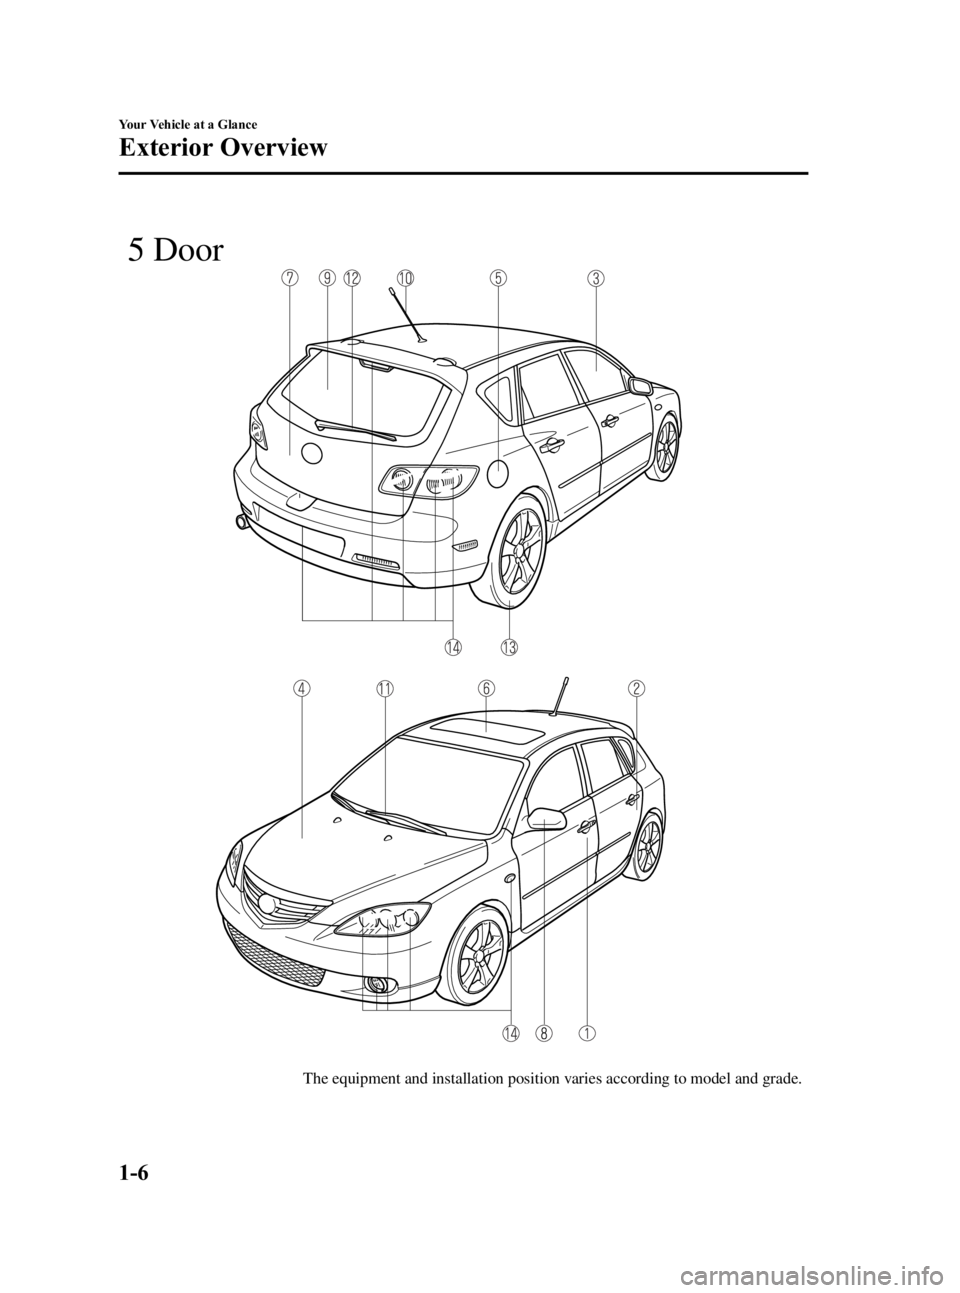 MAZDA MODEL 3 5-DOOR 2005 User Guide Black plate (12,1)
The equipment and installation position varies according to model and grade.
 5 Door
1-6
Your Vehicle at a Glance
Exterior Overview
Mazda3_8T96-EA-04J_Edition3 Page12
Wednesday, May